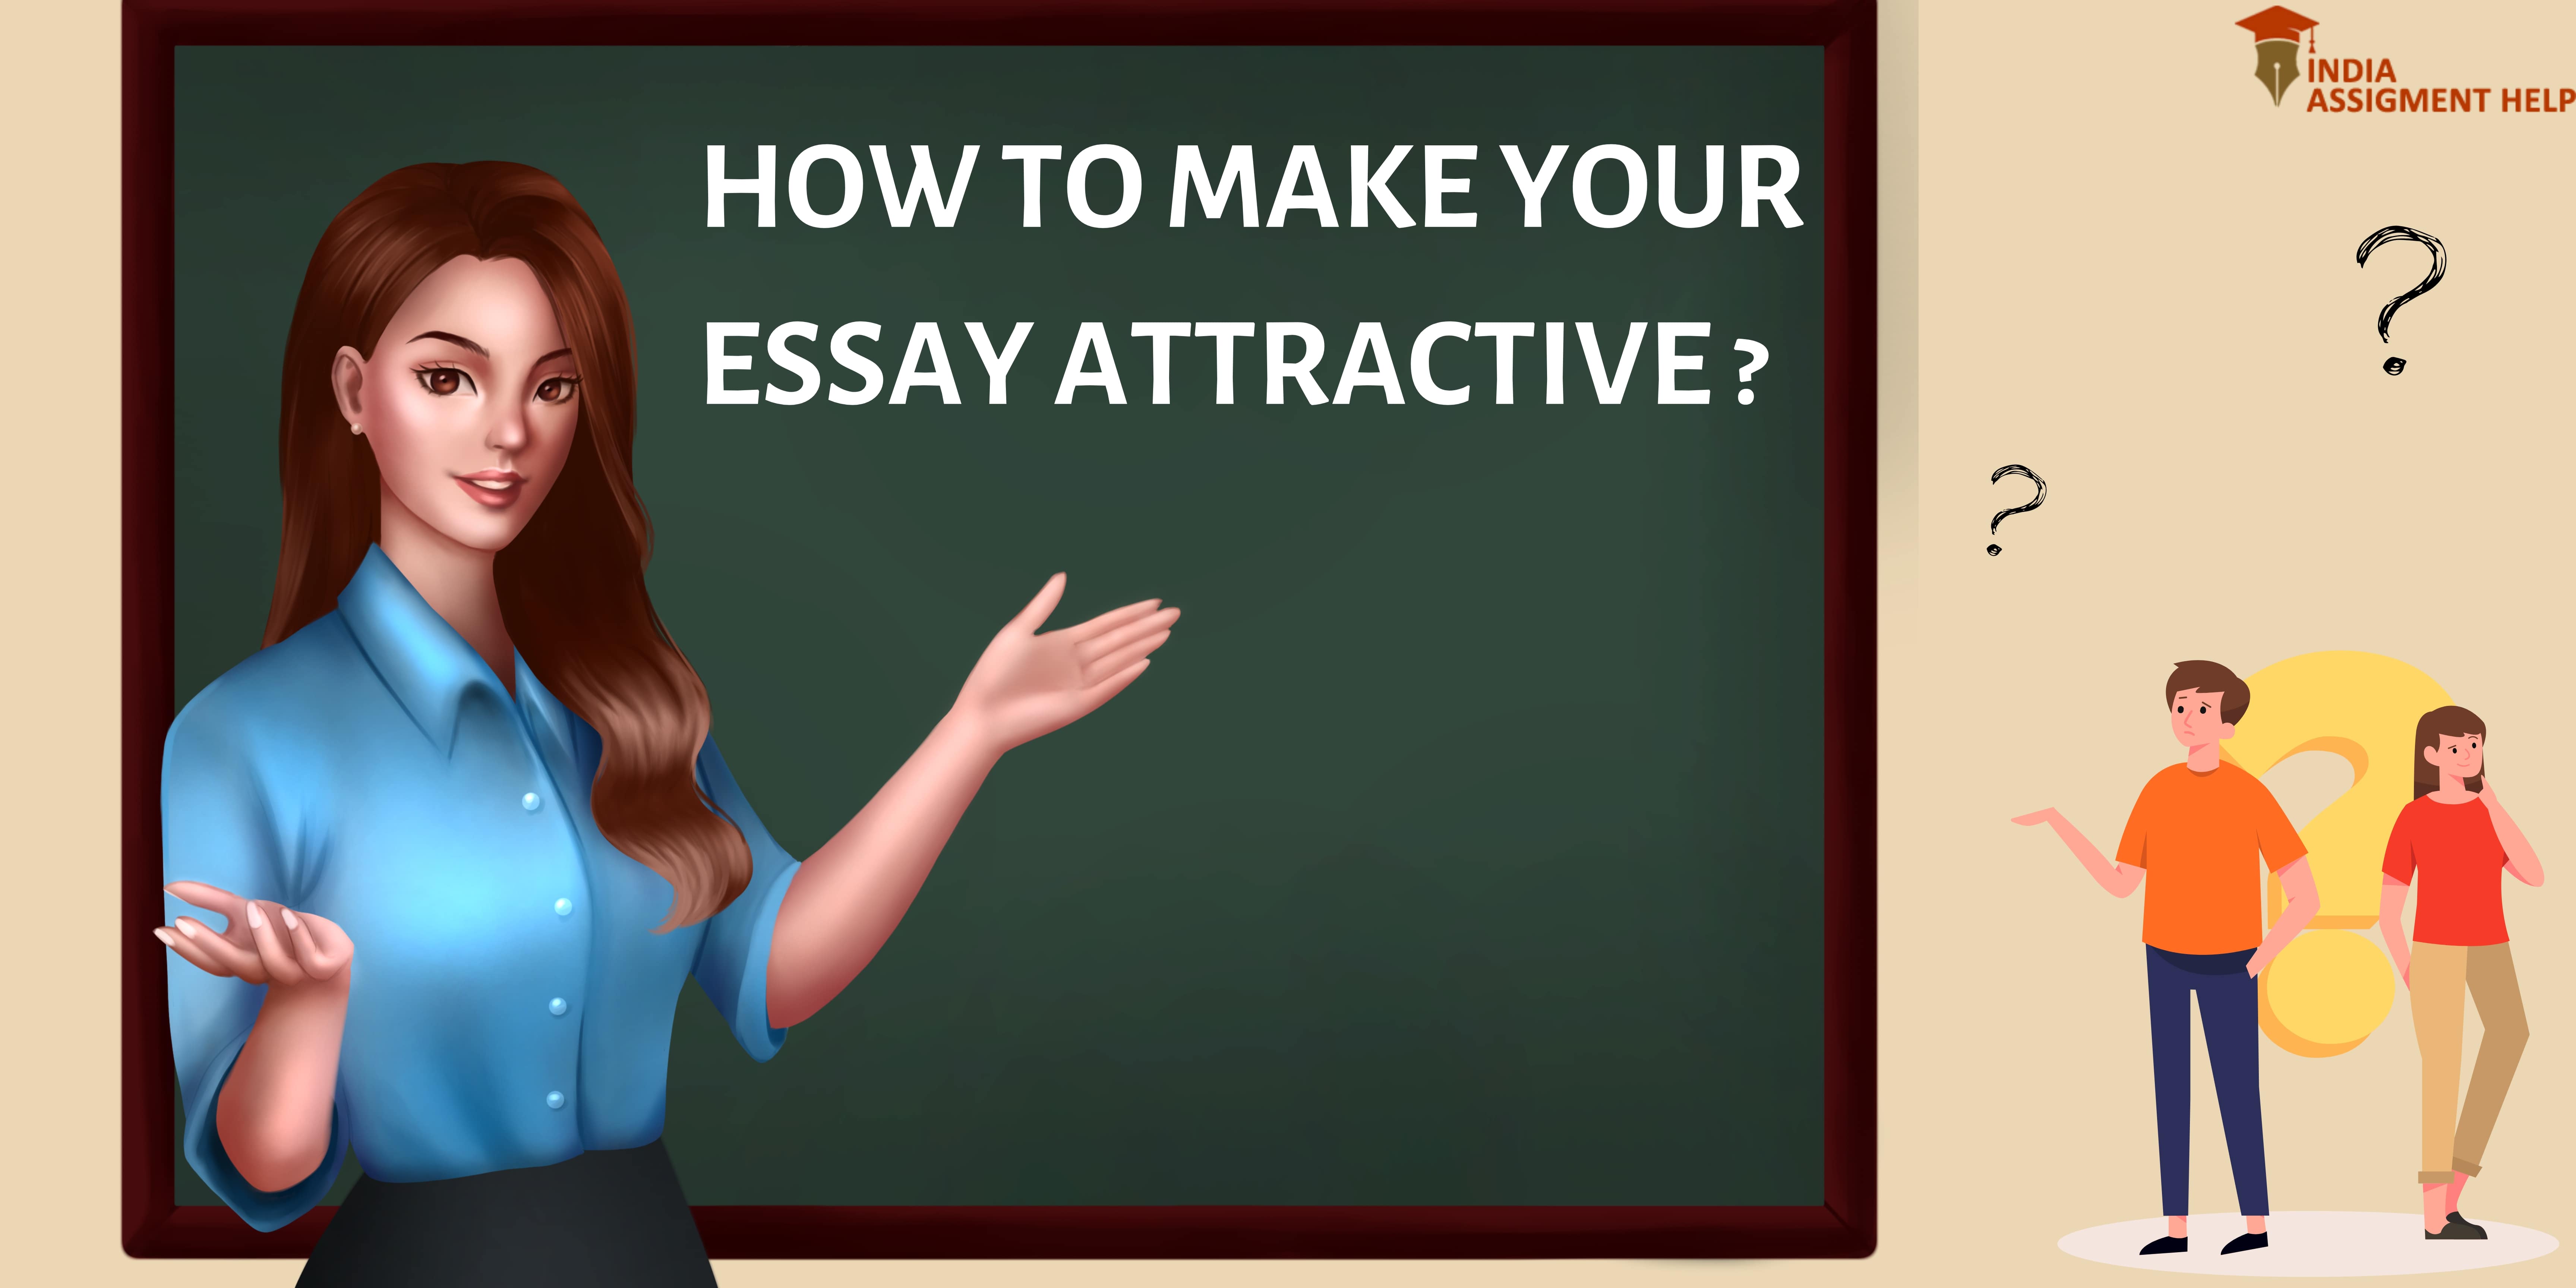 How to Make Your Essay Attractive?